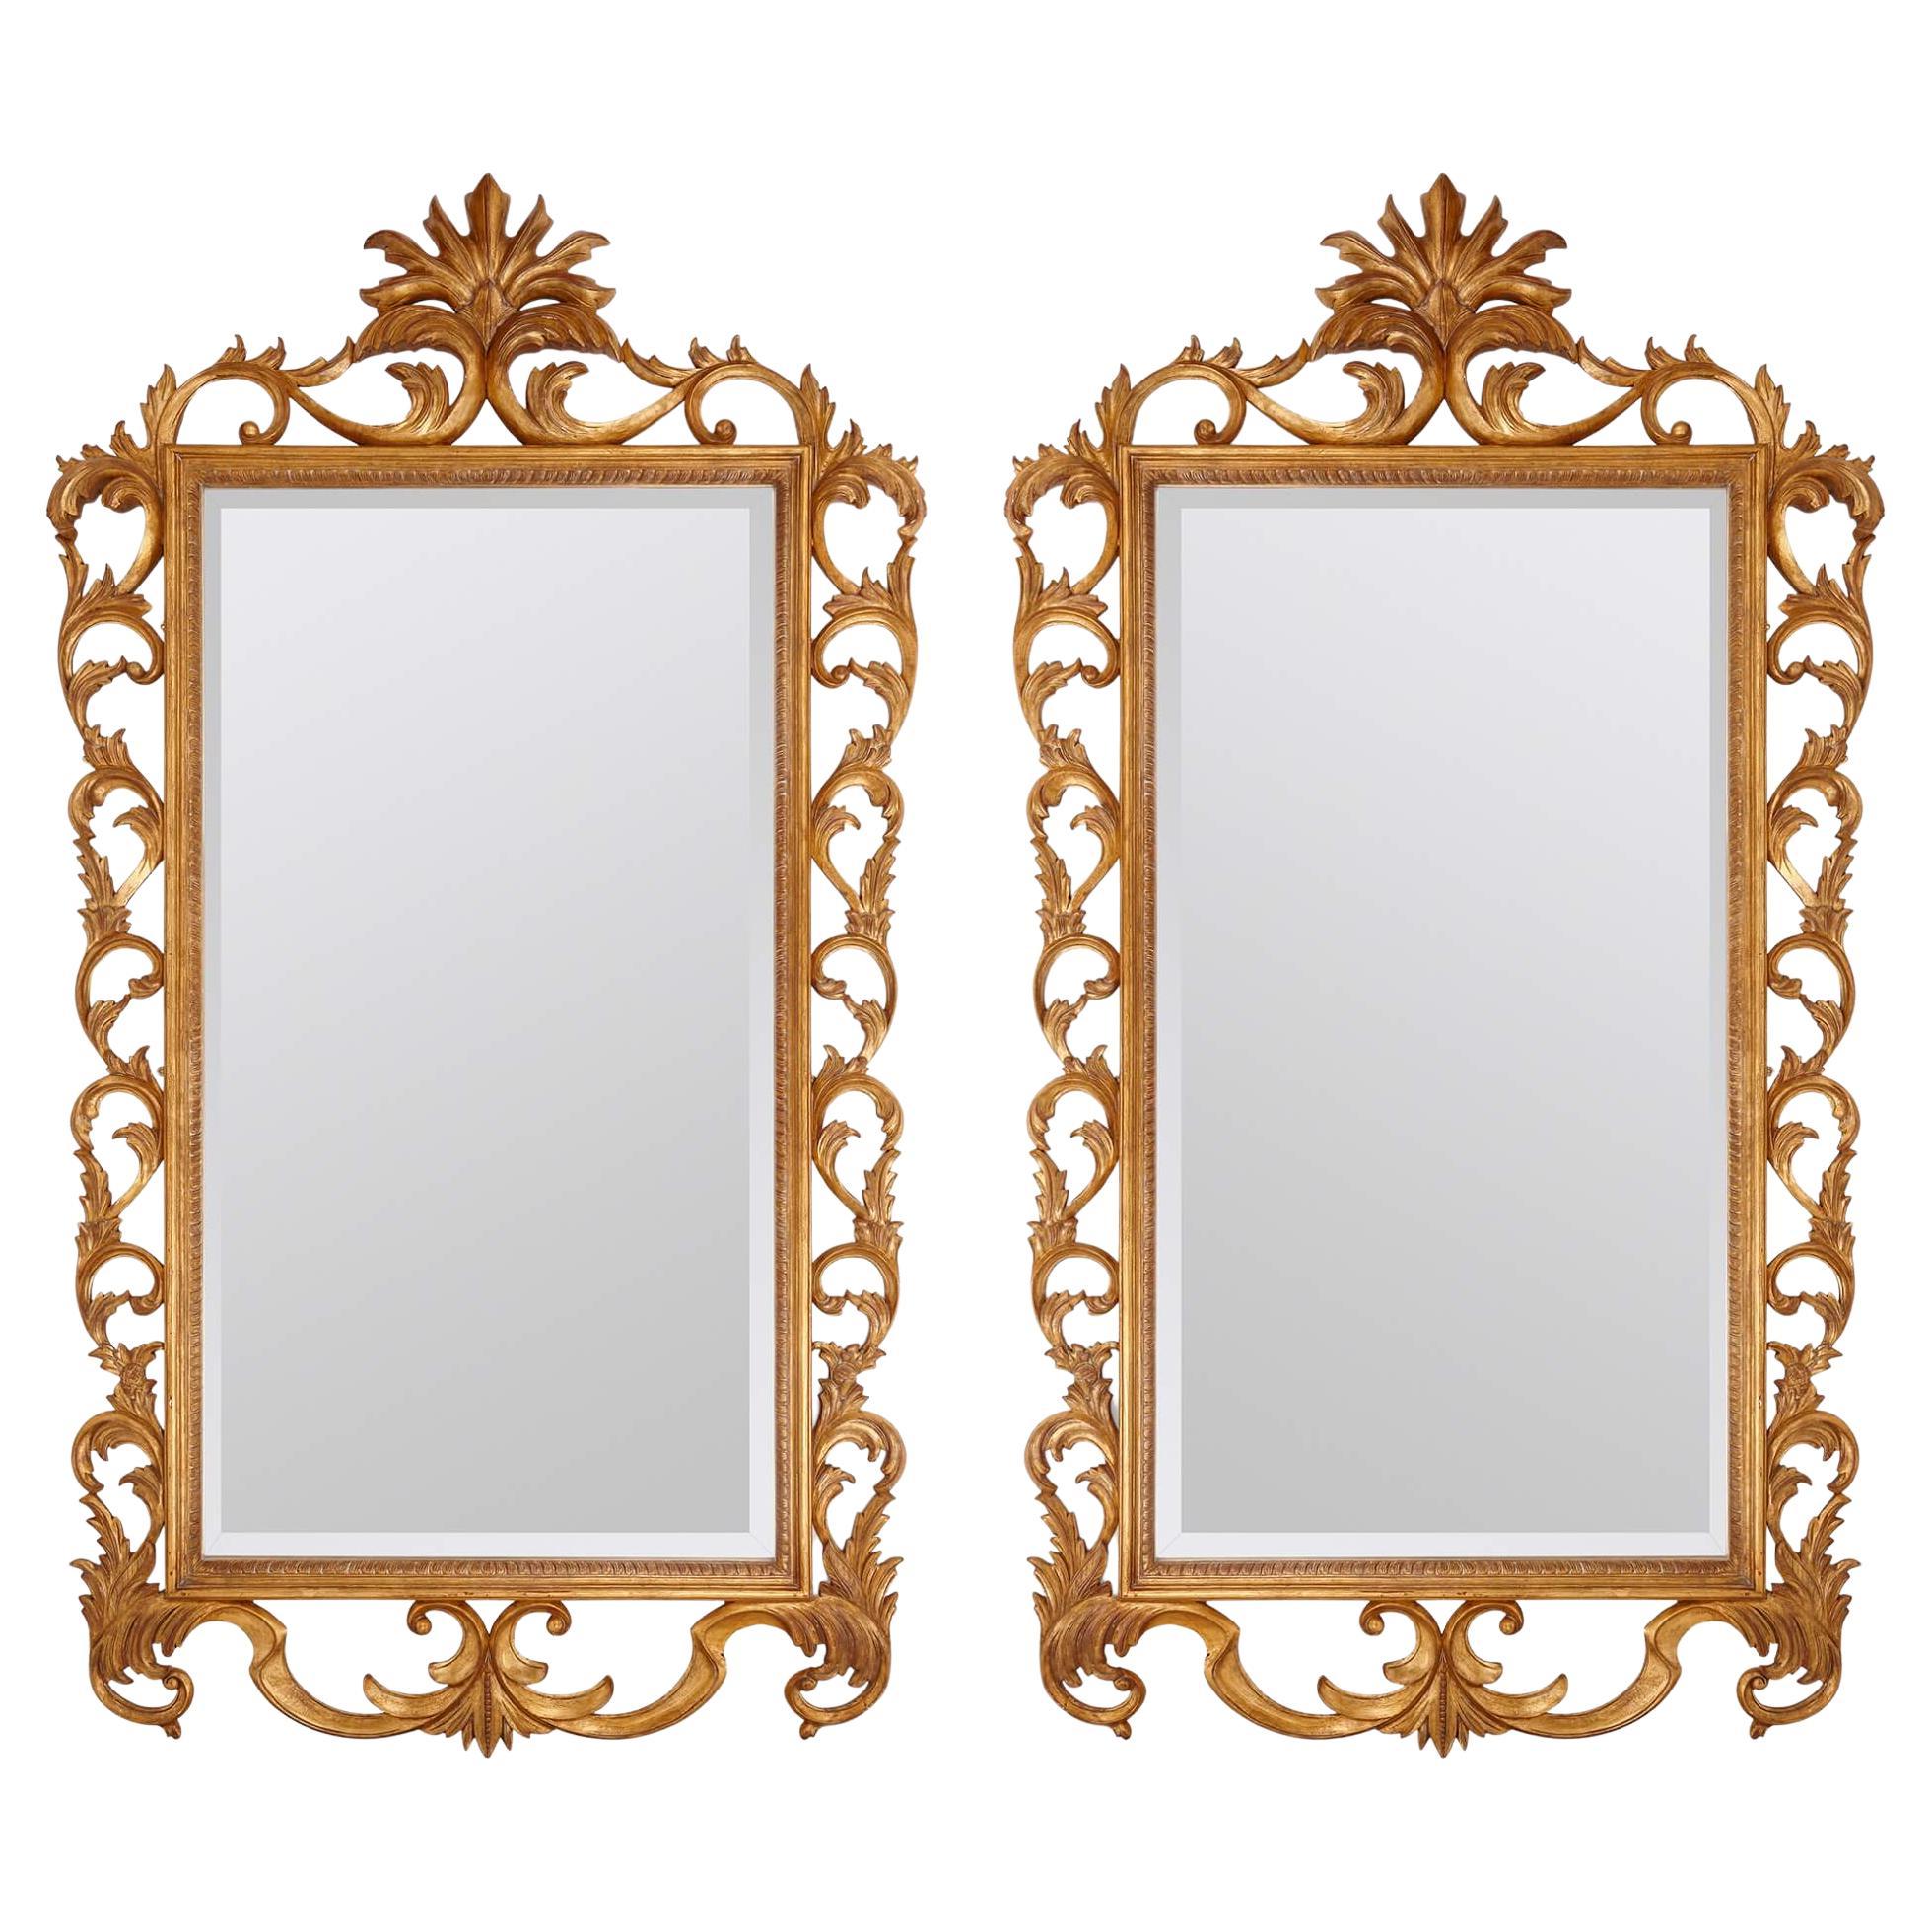 Pair of Very Large French Giltwood Mirrors with Scrolled Acanthus Borders For Sale